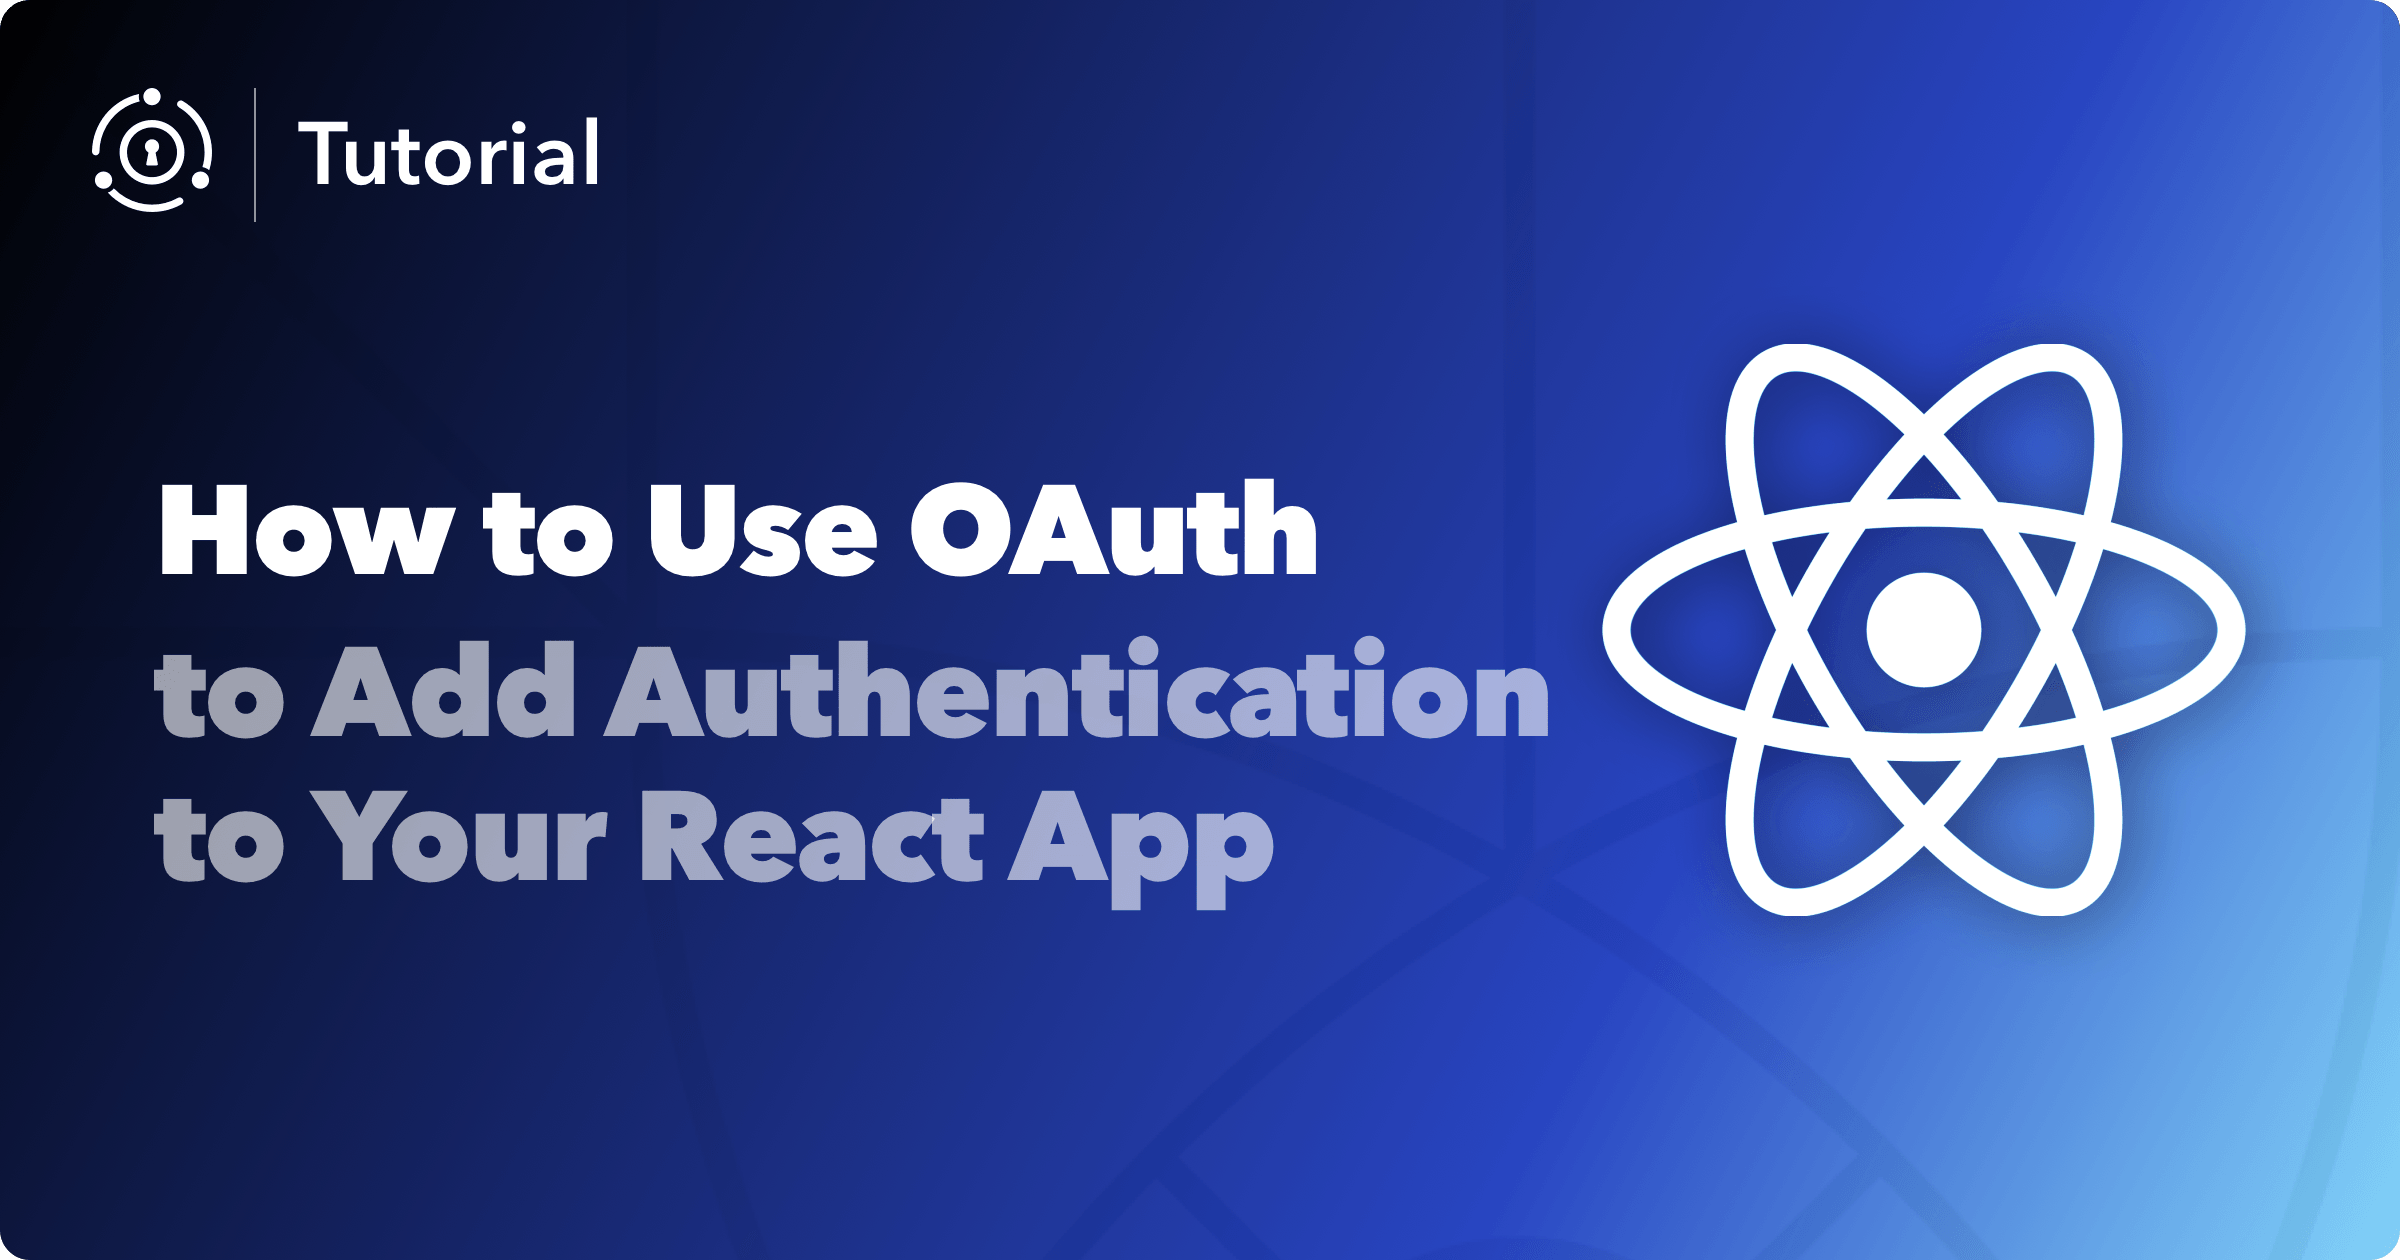 How to use OAuth to Add Authentication to Your React App